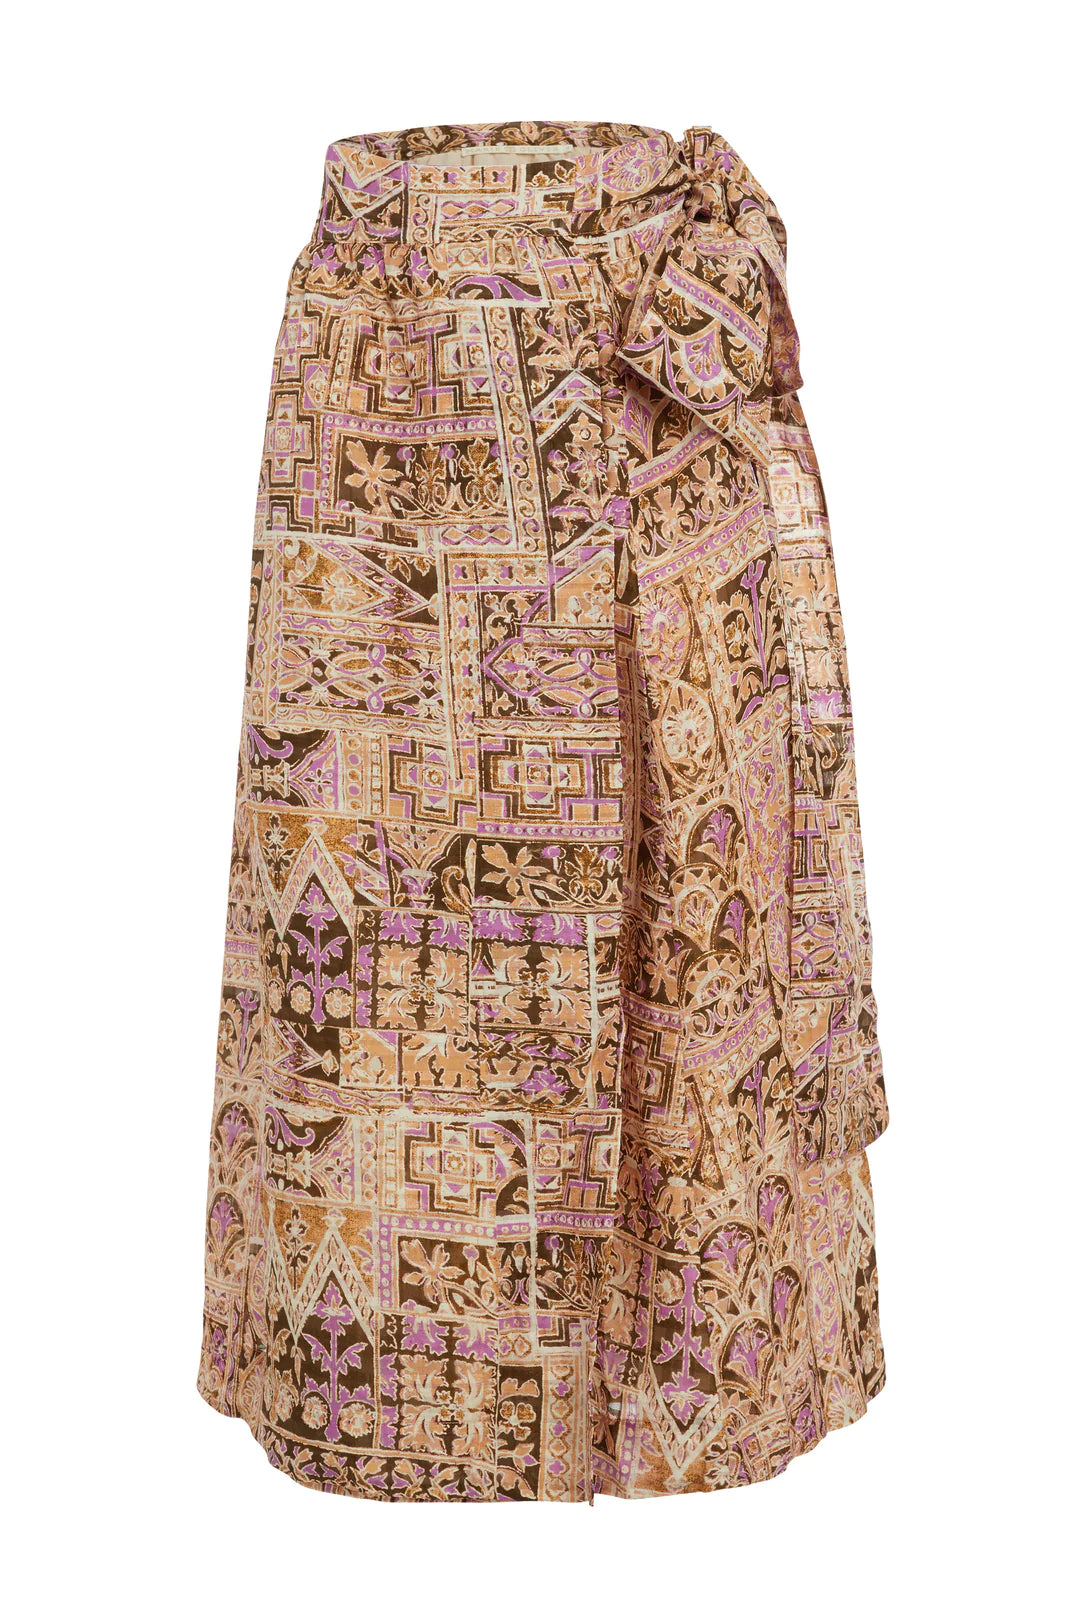 Estine Wrap Skirt by Marie Oliver in Amethyst Tile